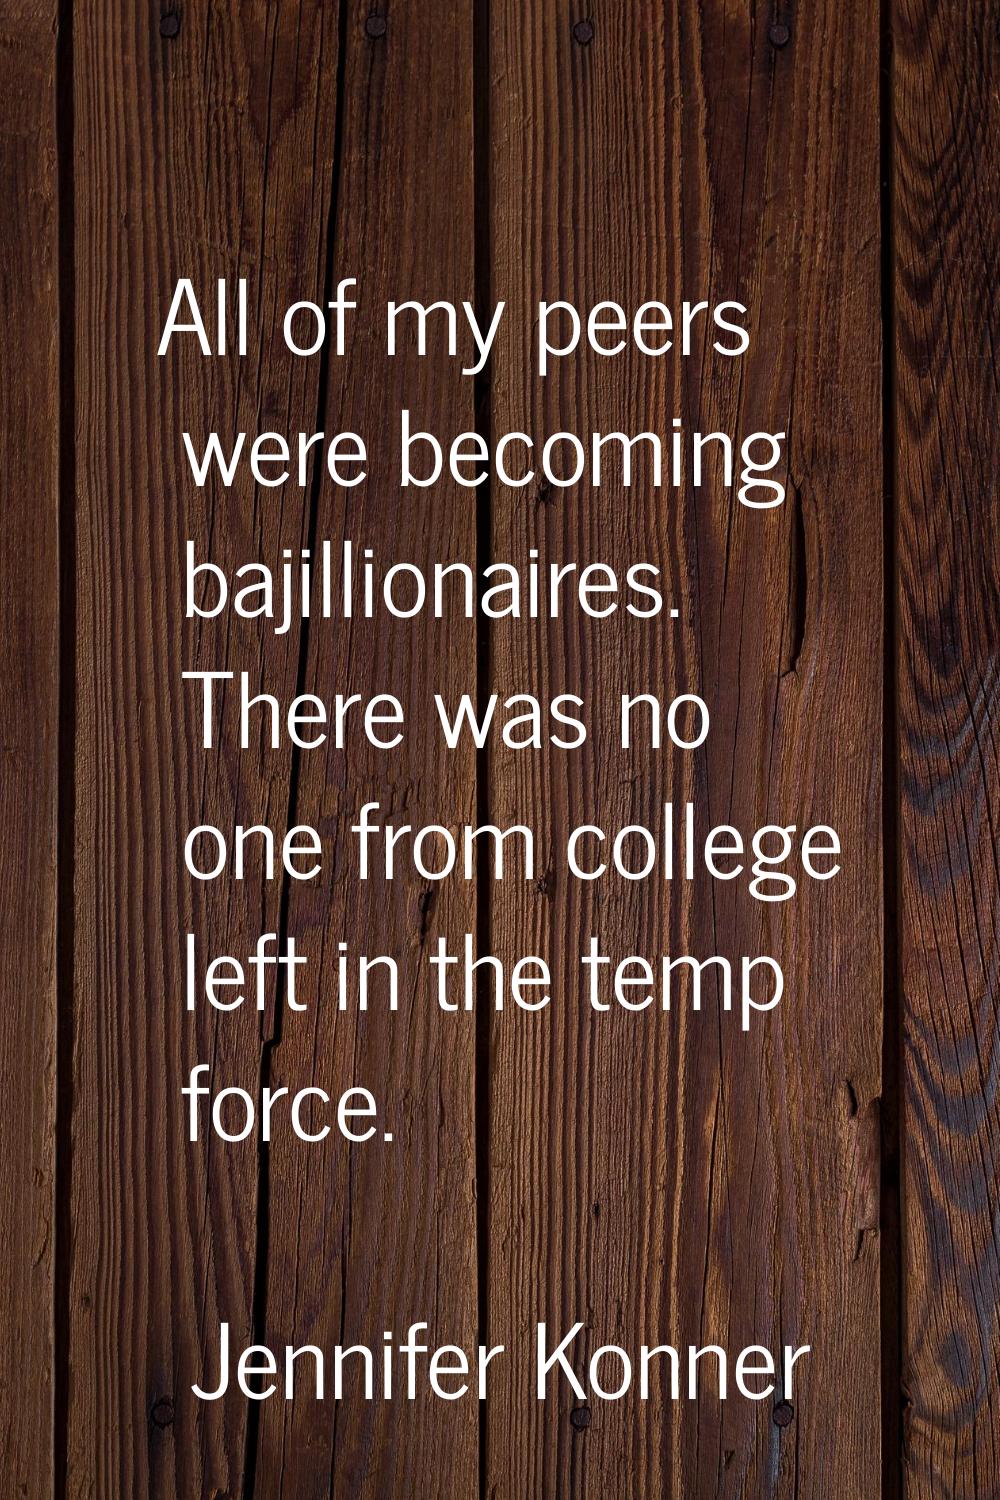 All of my peers were becoming bajillionaires. There was no one from college left in the temp force.